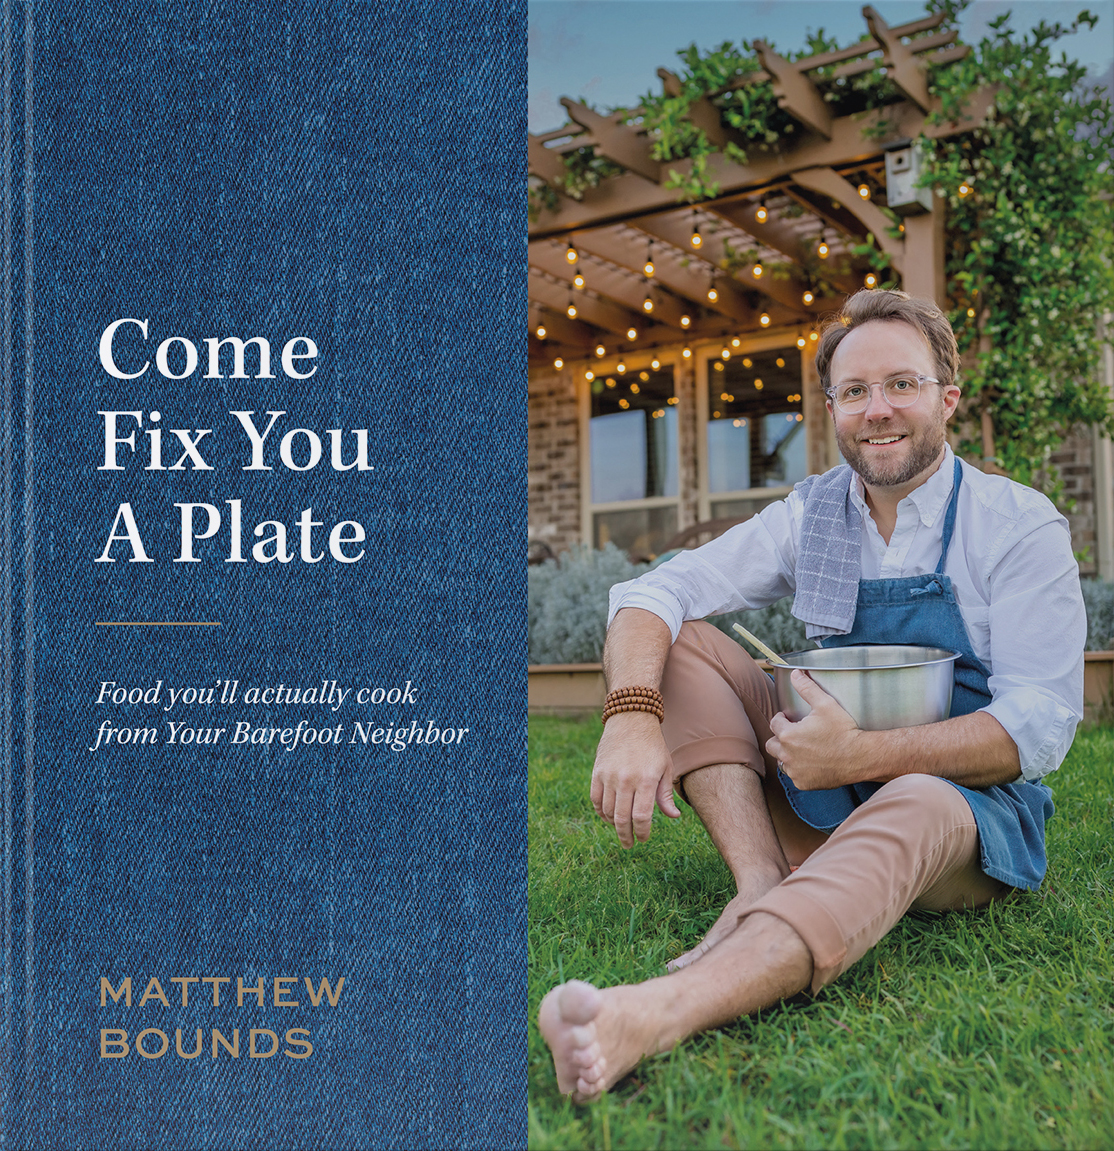 Come Fix You A Plate from @yourbarefootneighbor | Found it!